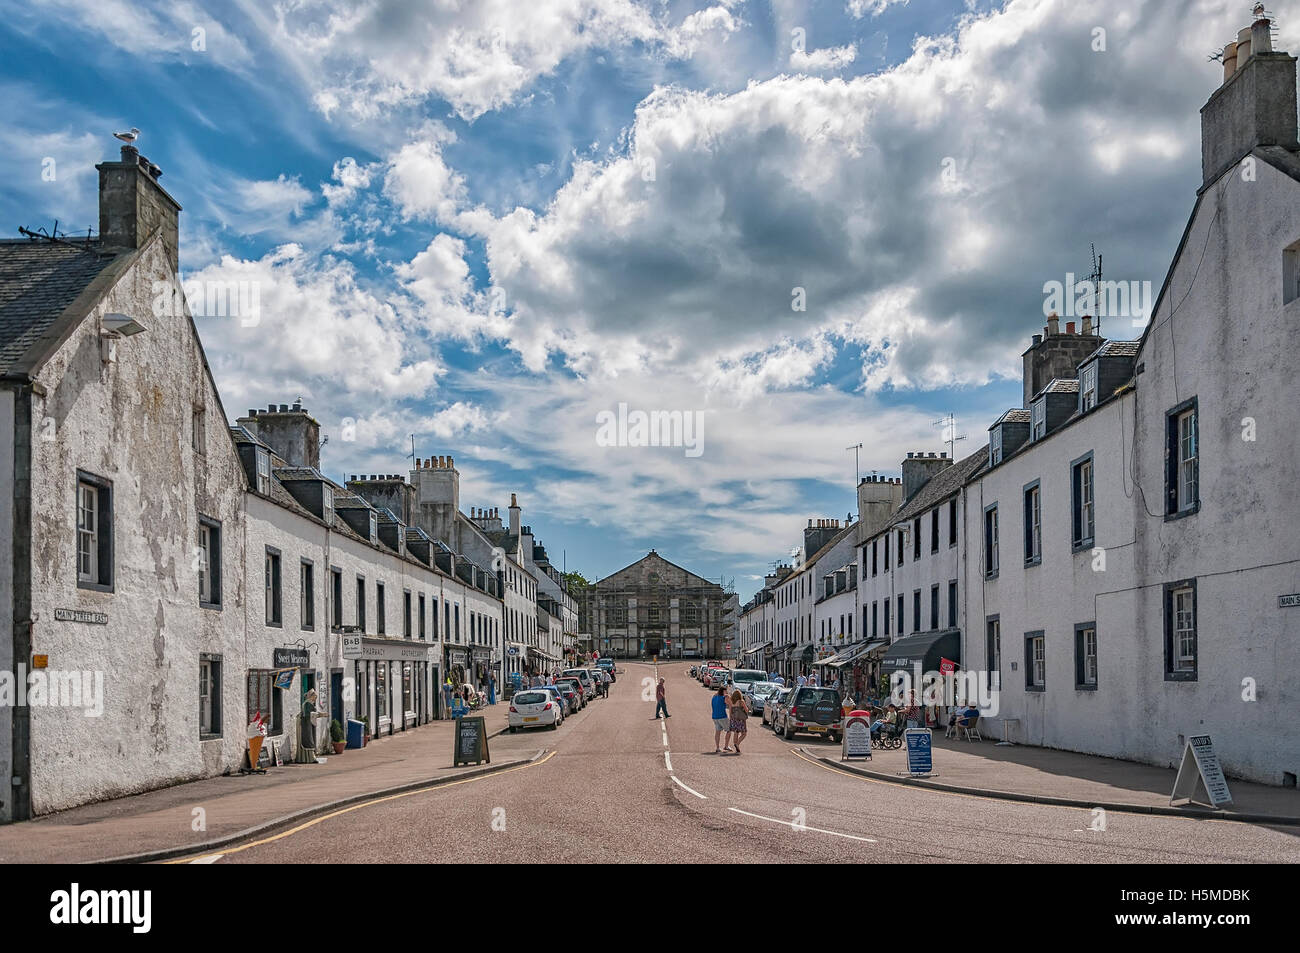 Main street in Inveraray, the traditional county town of Argyll, Scotland. Stock Photo